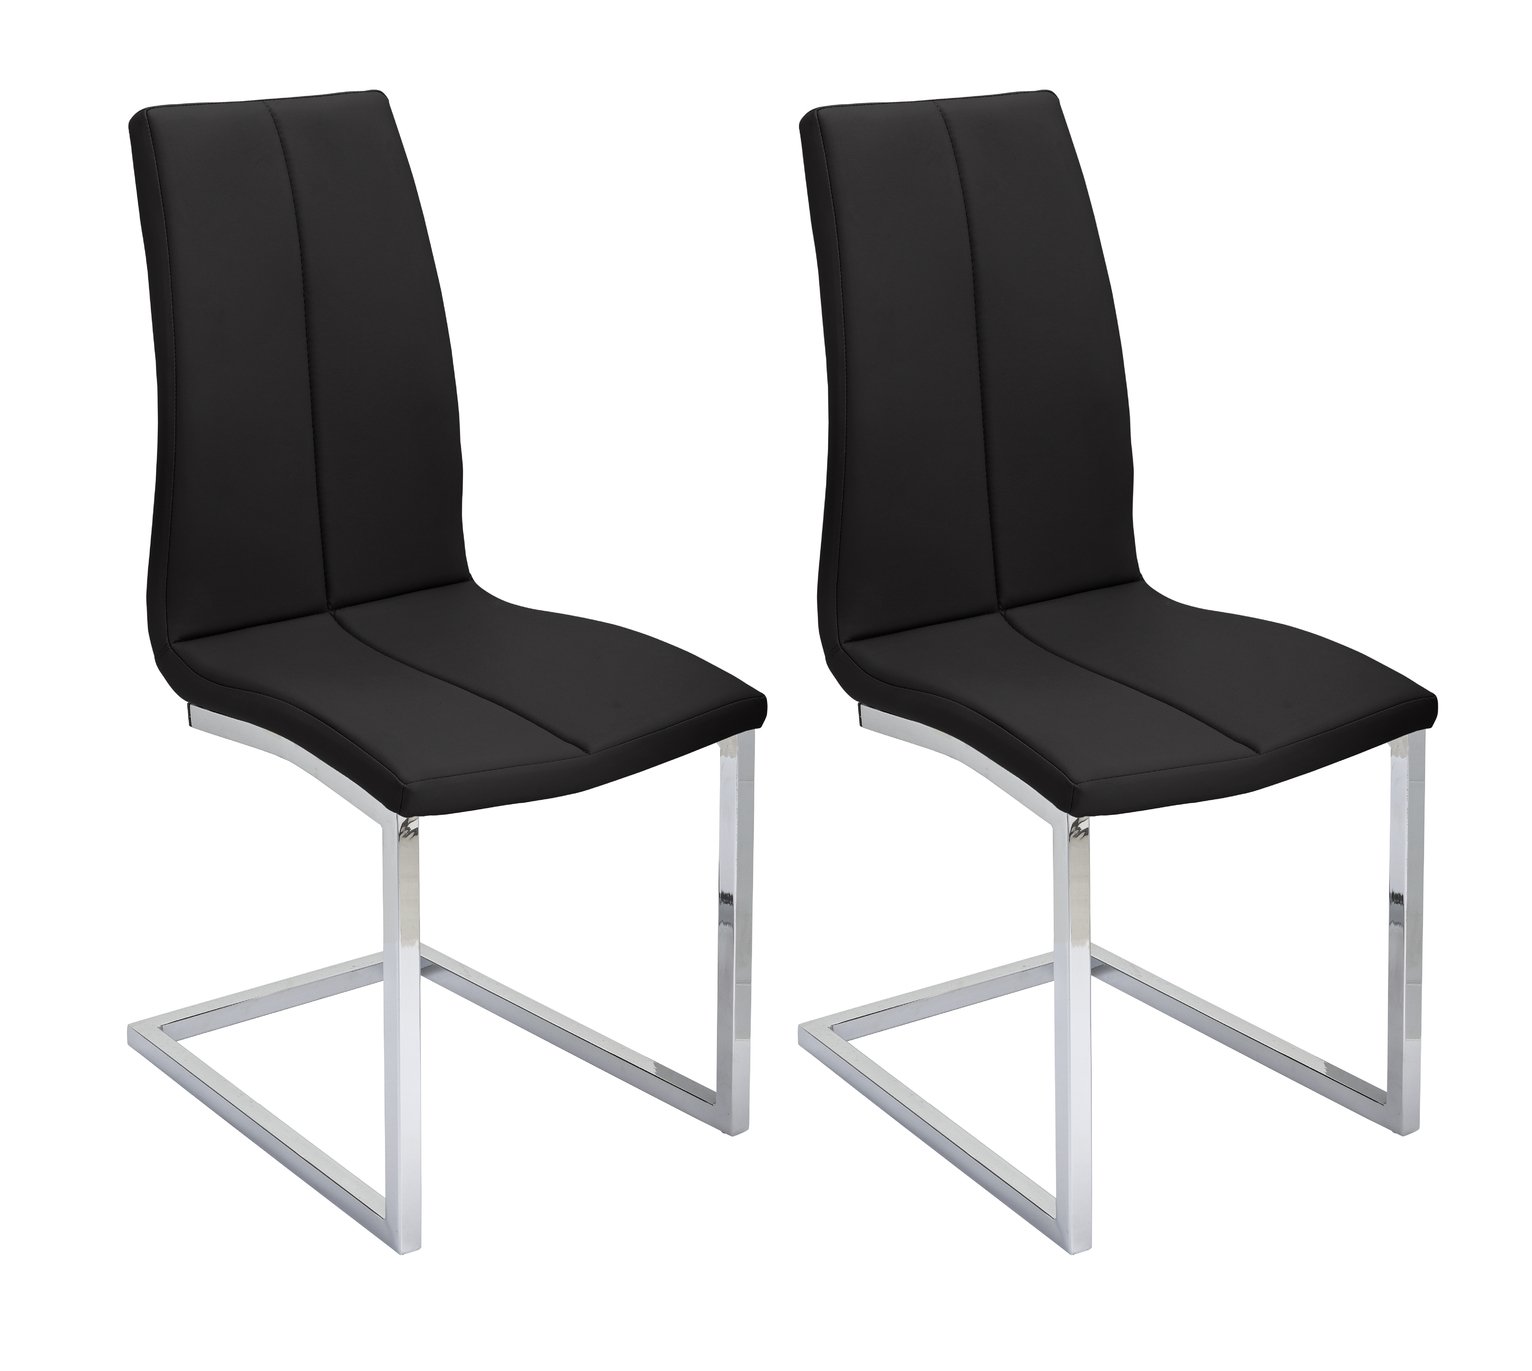 Argos Home Milo Pair of Faux Leather Dining Chairs - Black